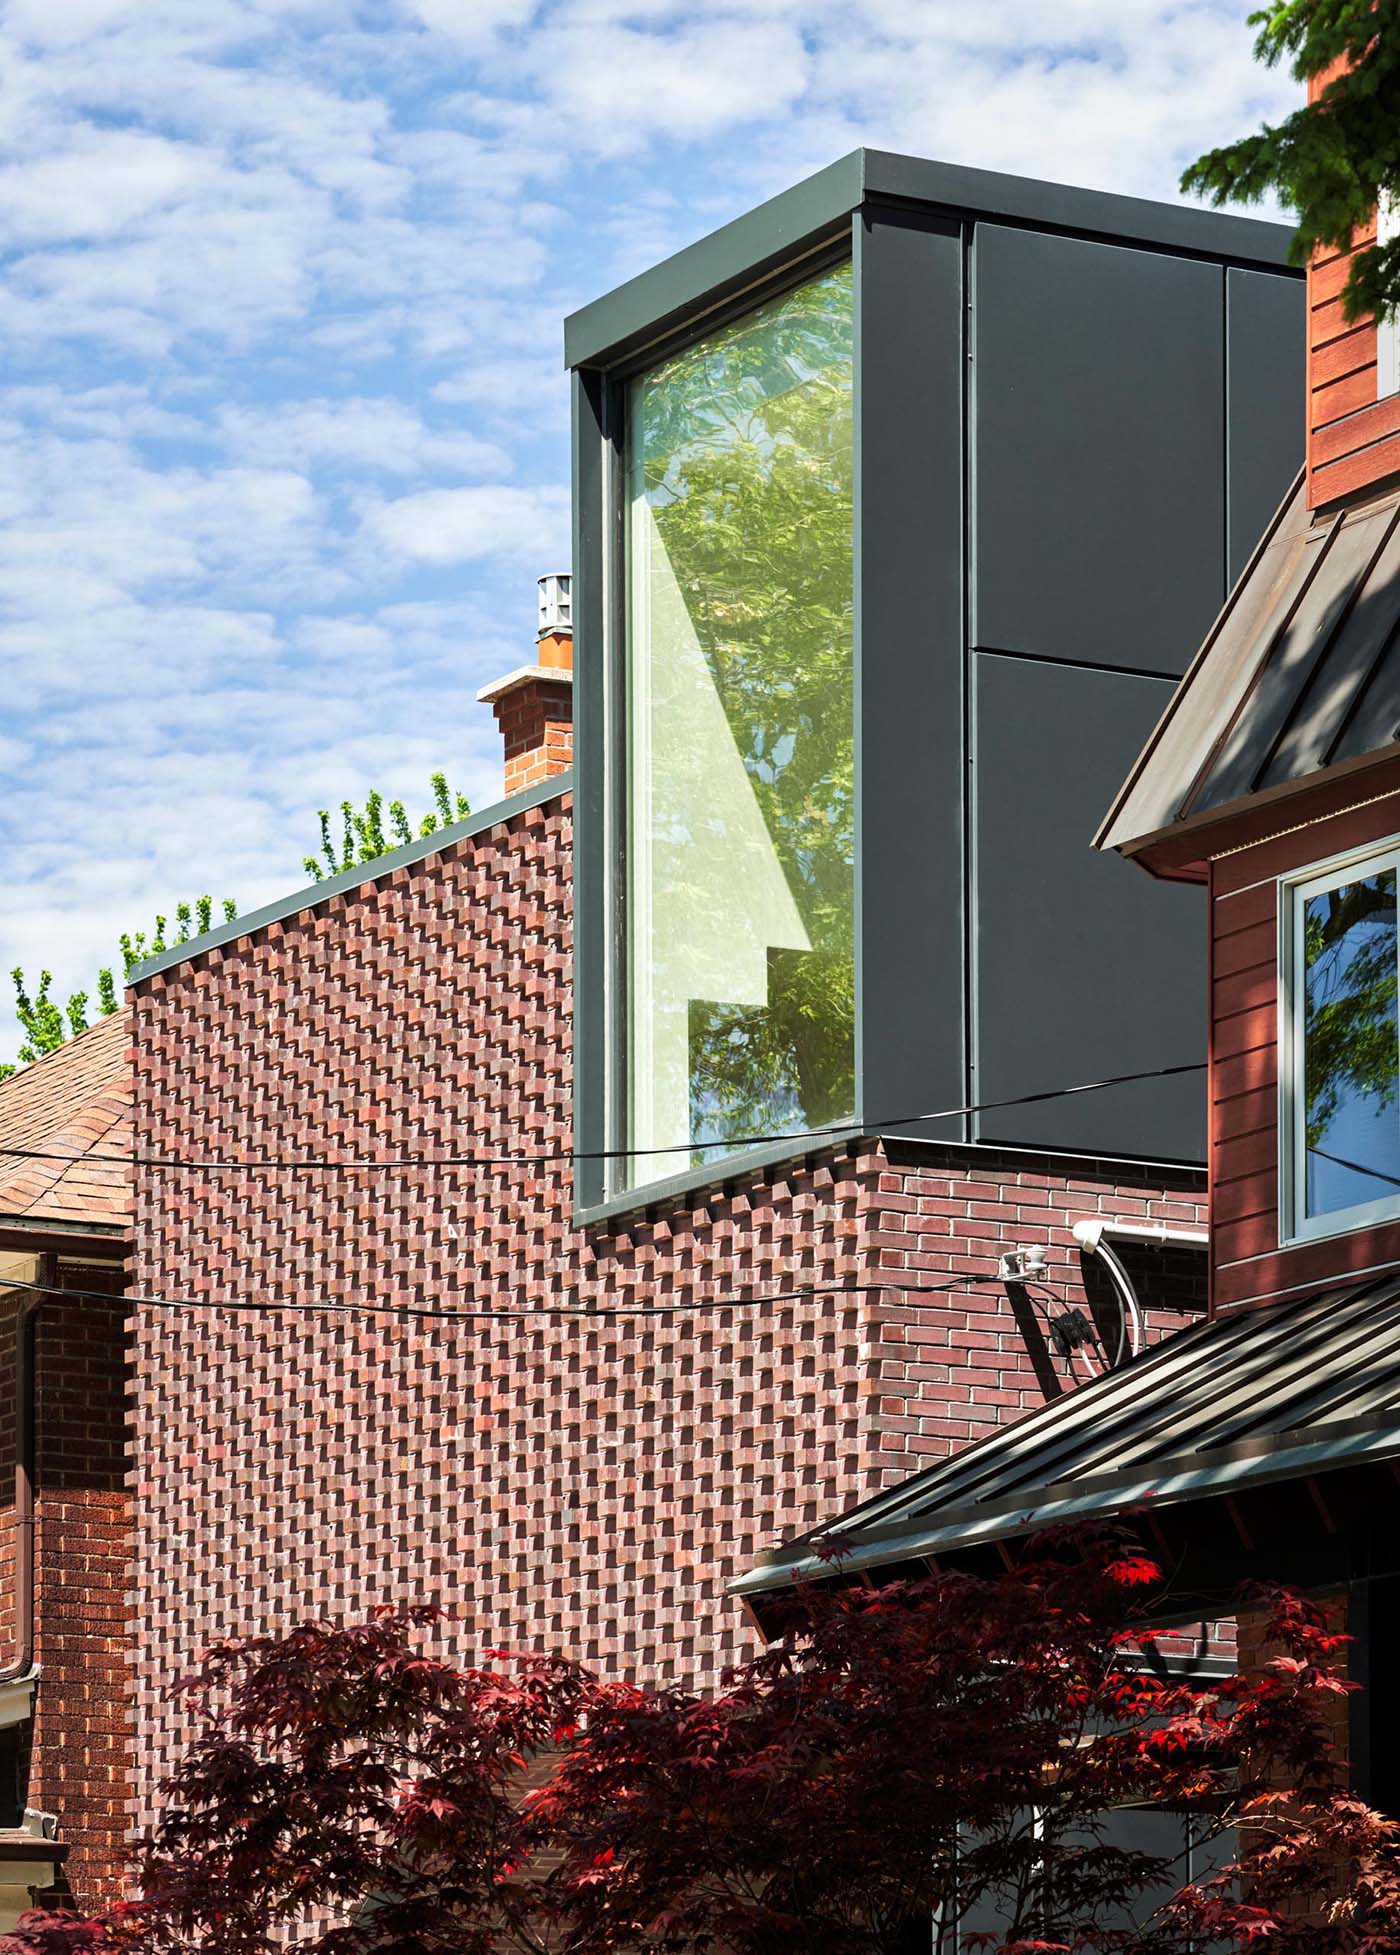 In the summer, the brick protrusions on this modern home texture the facade with stark shadows, and in the winter the texture transforms through bricks creating shelves for the snow to fall on.